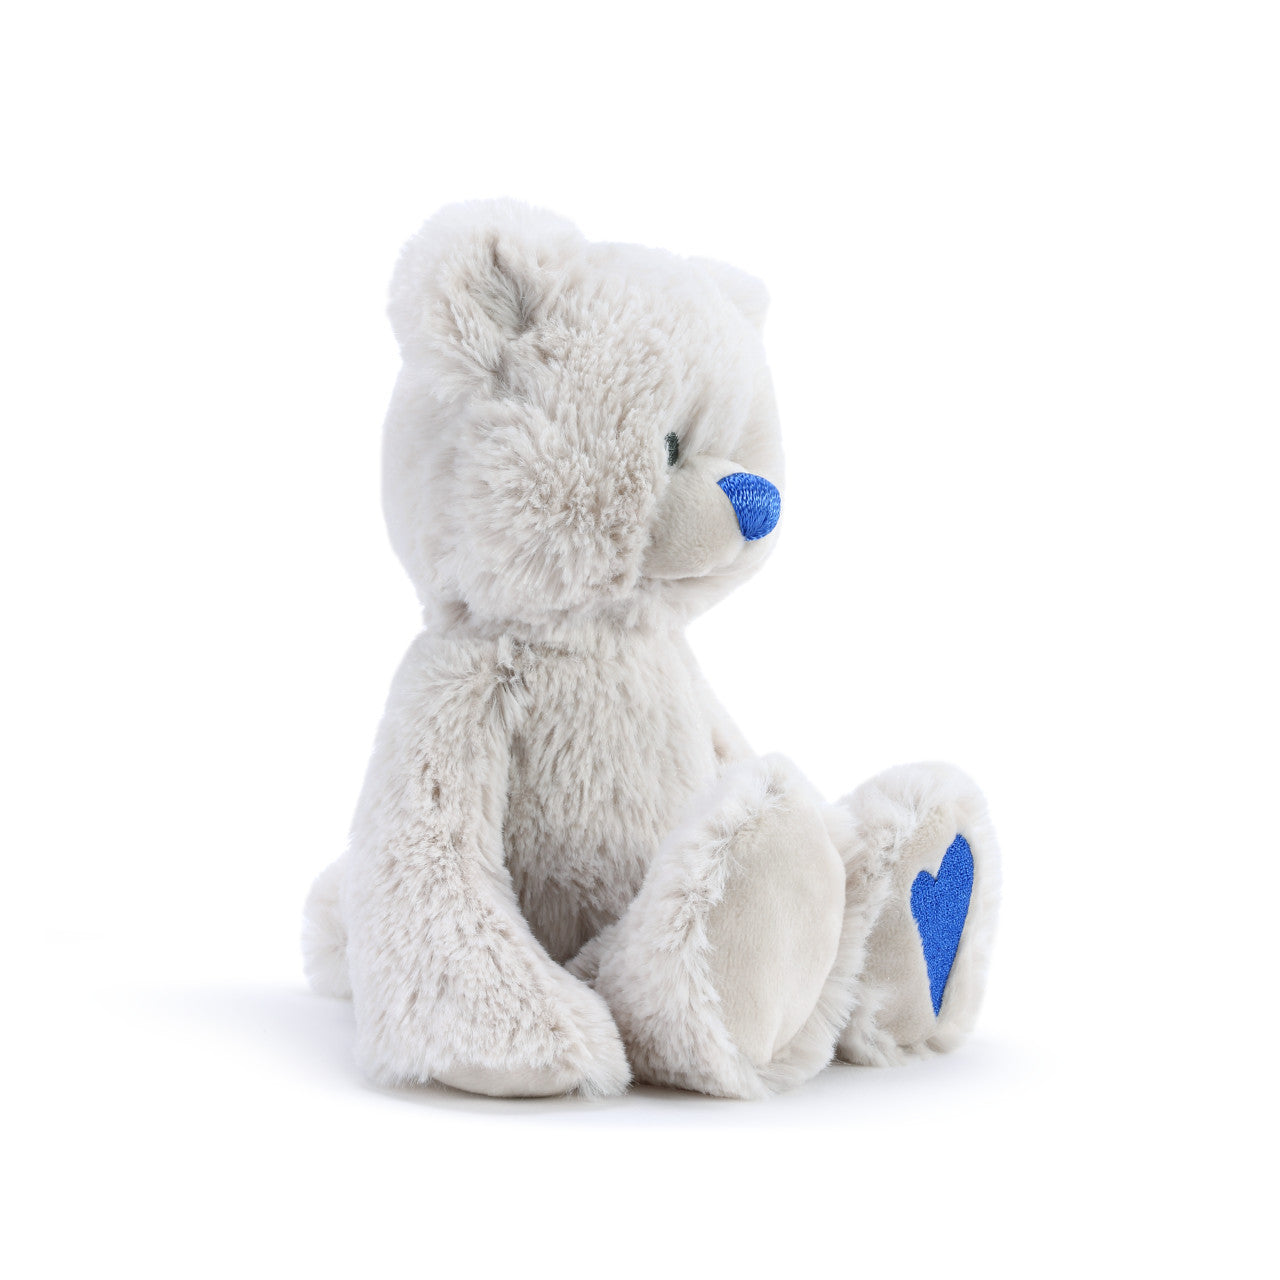 Demdaco September Birthstone Bear available at The Good Life Boutique